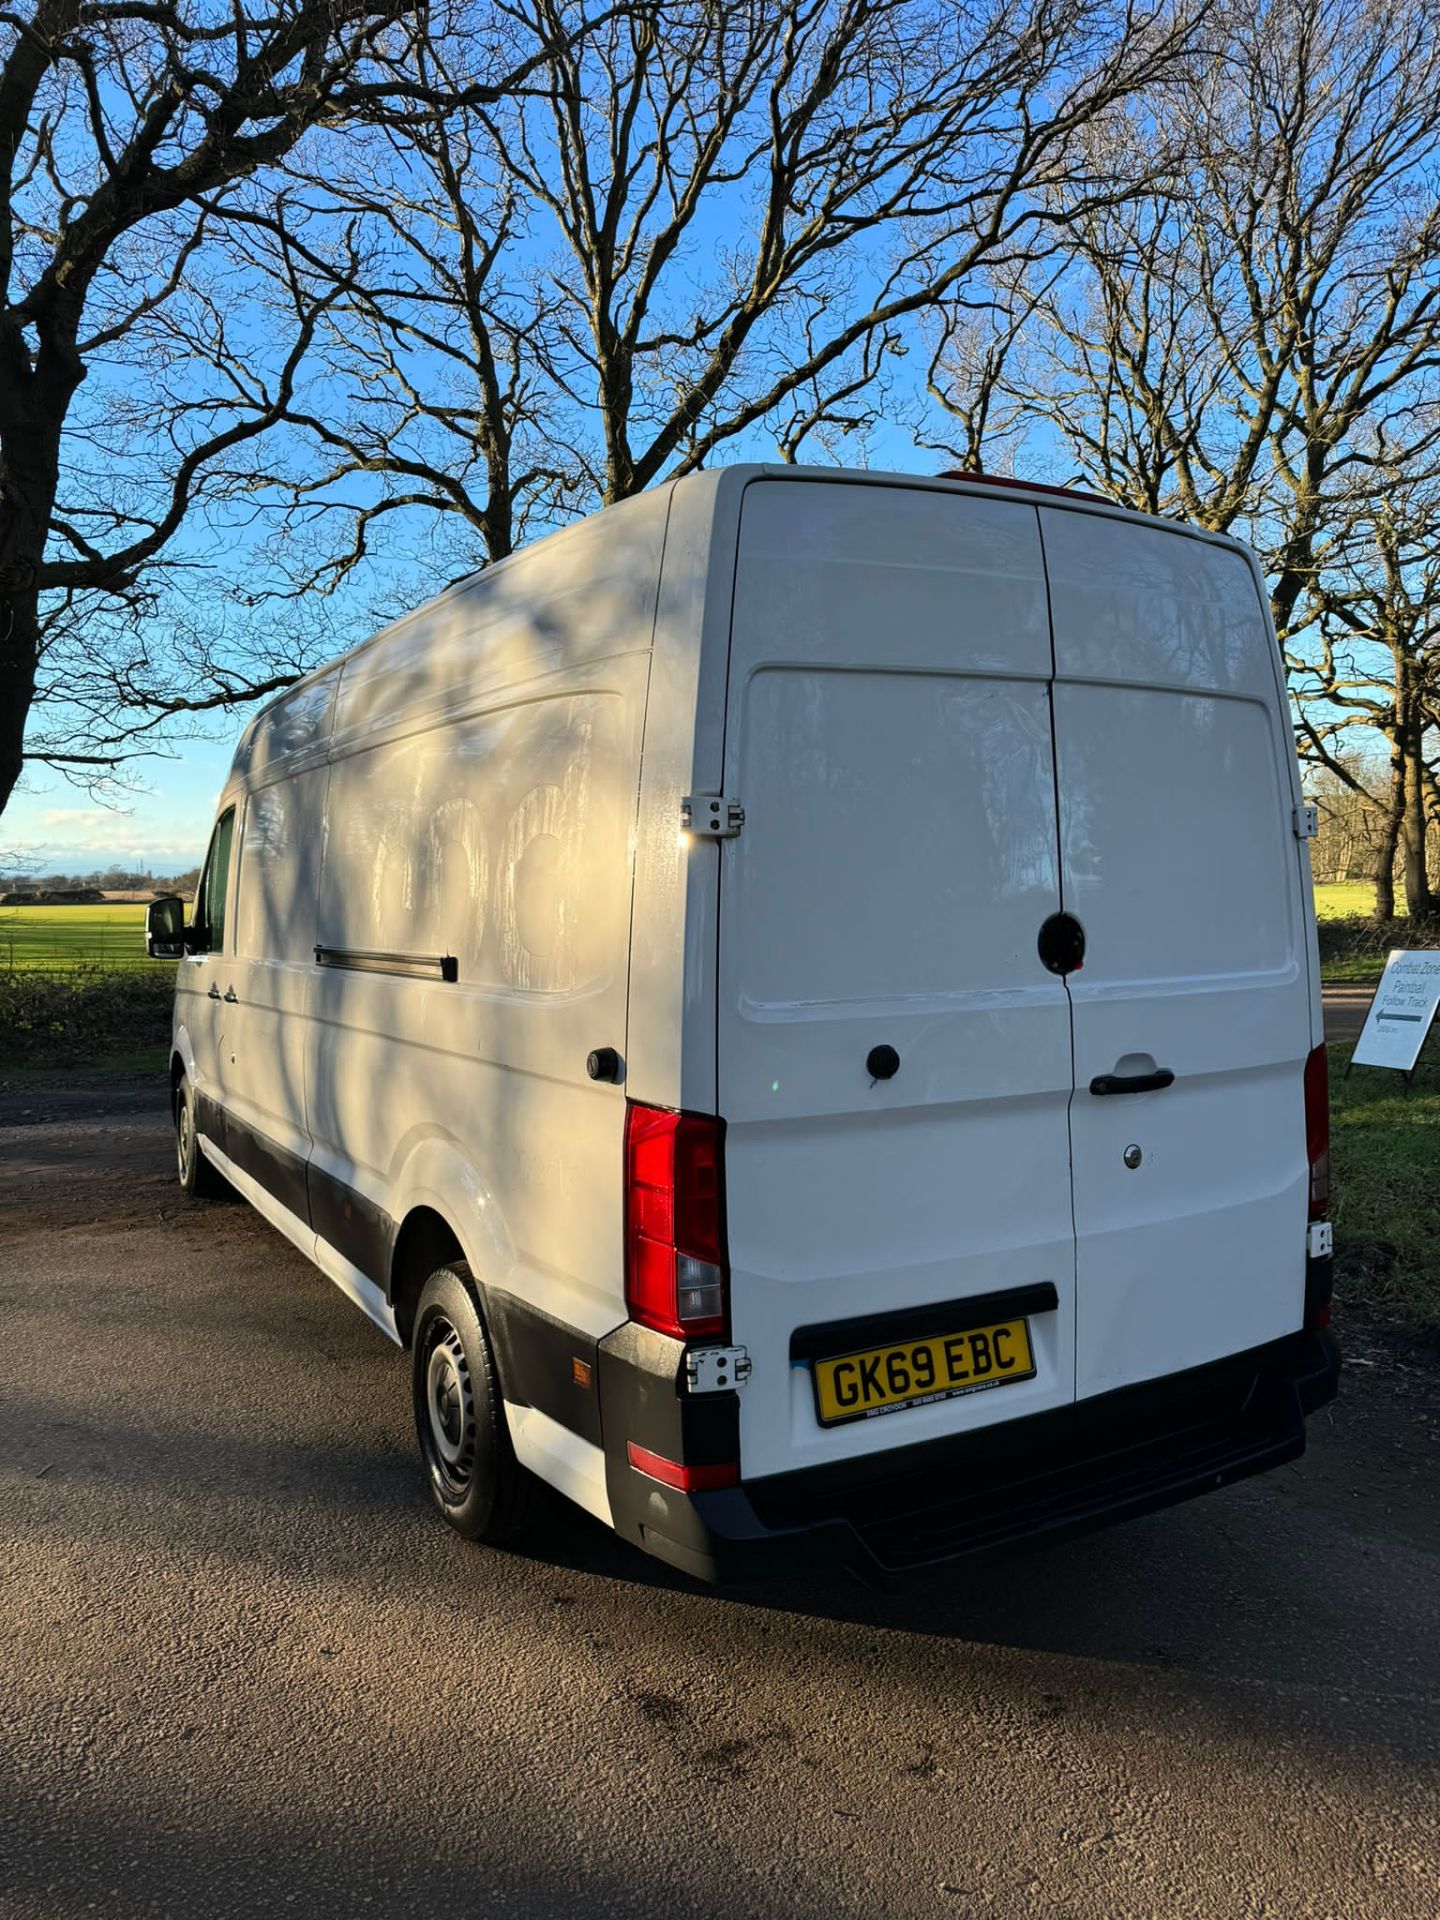 2019 69 VOLKSWAGEN CRAFTER LWB HIGH ROOF PANEL VAN - 87K MILES - PLY LINED. - Image 5 of 11